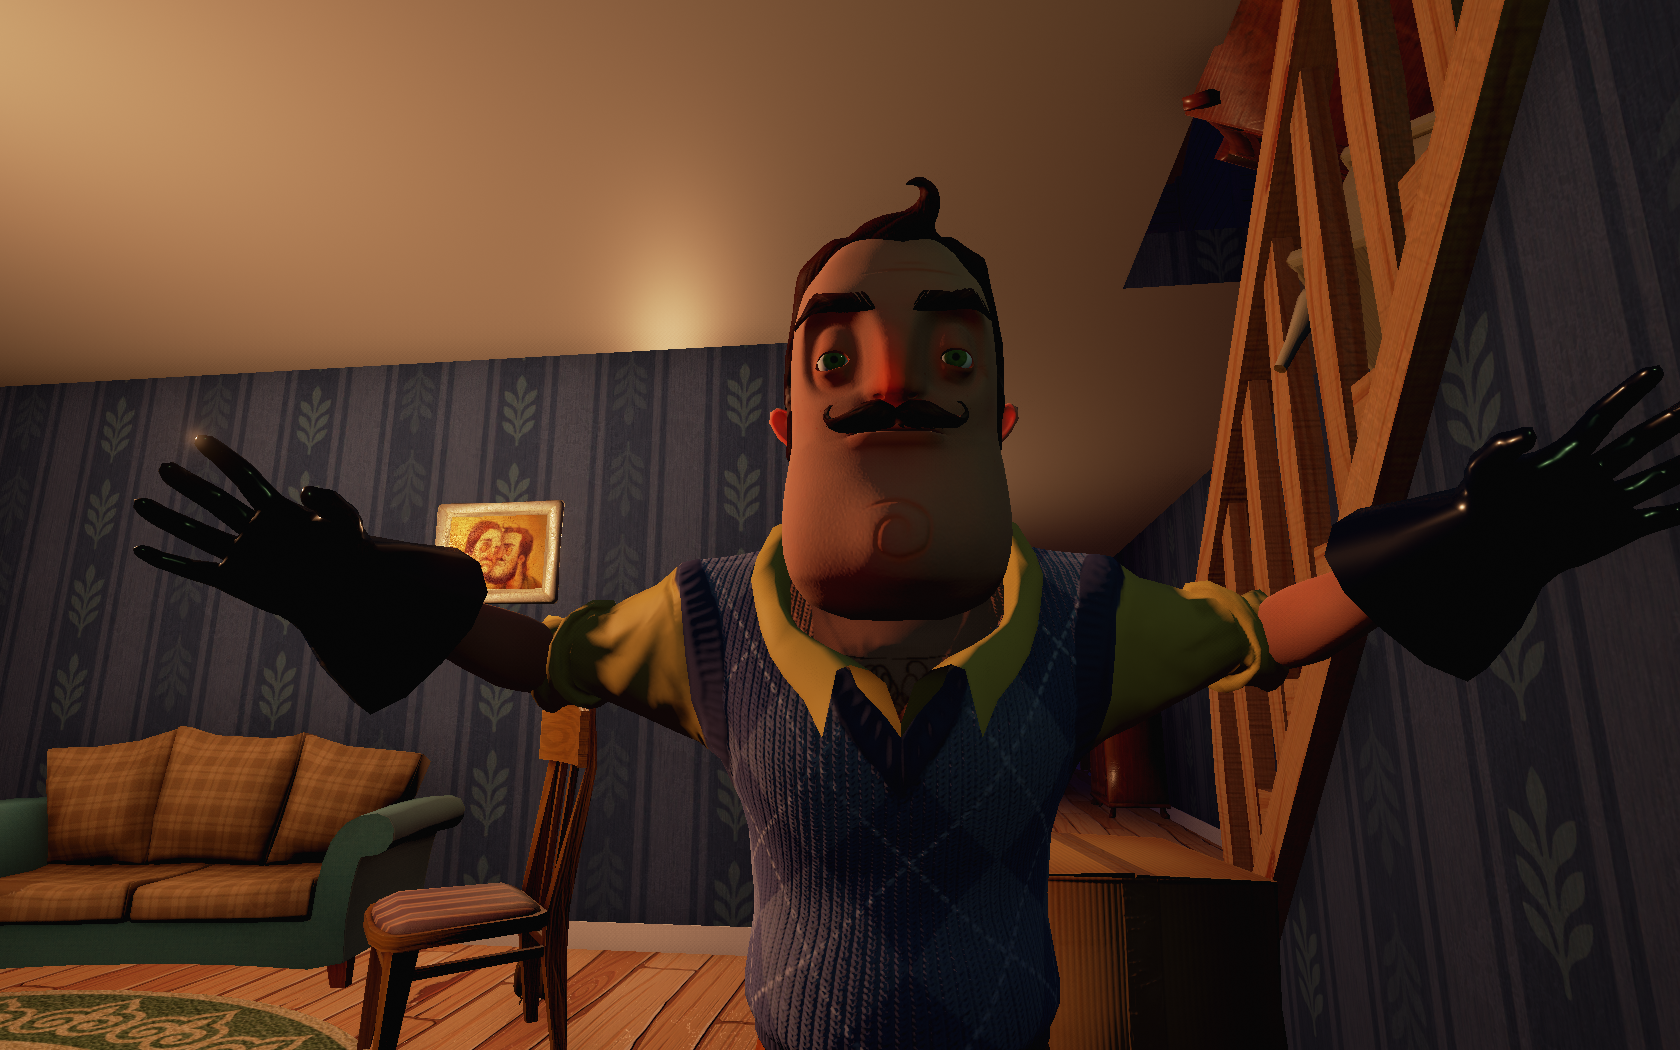 In-game screenshot of Hello Neighbor's creepy interior environment.Hello Neighbor game screenshot featuring the neighbor character in a room.